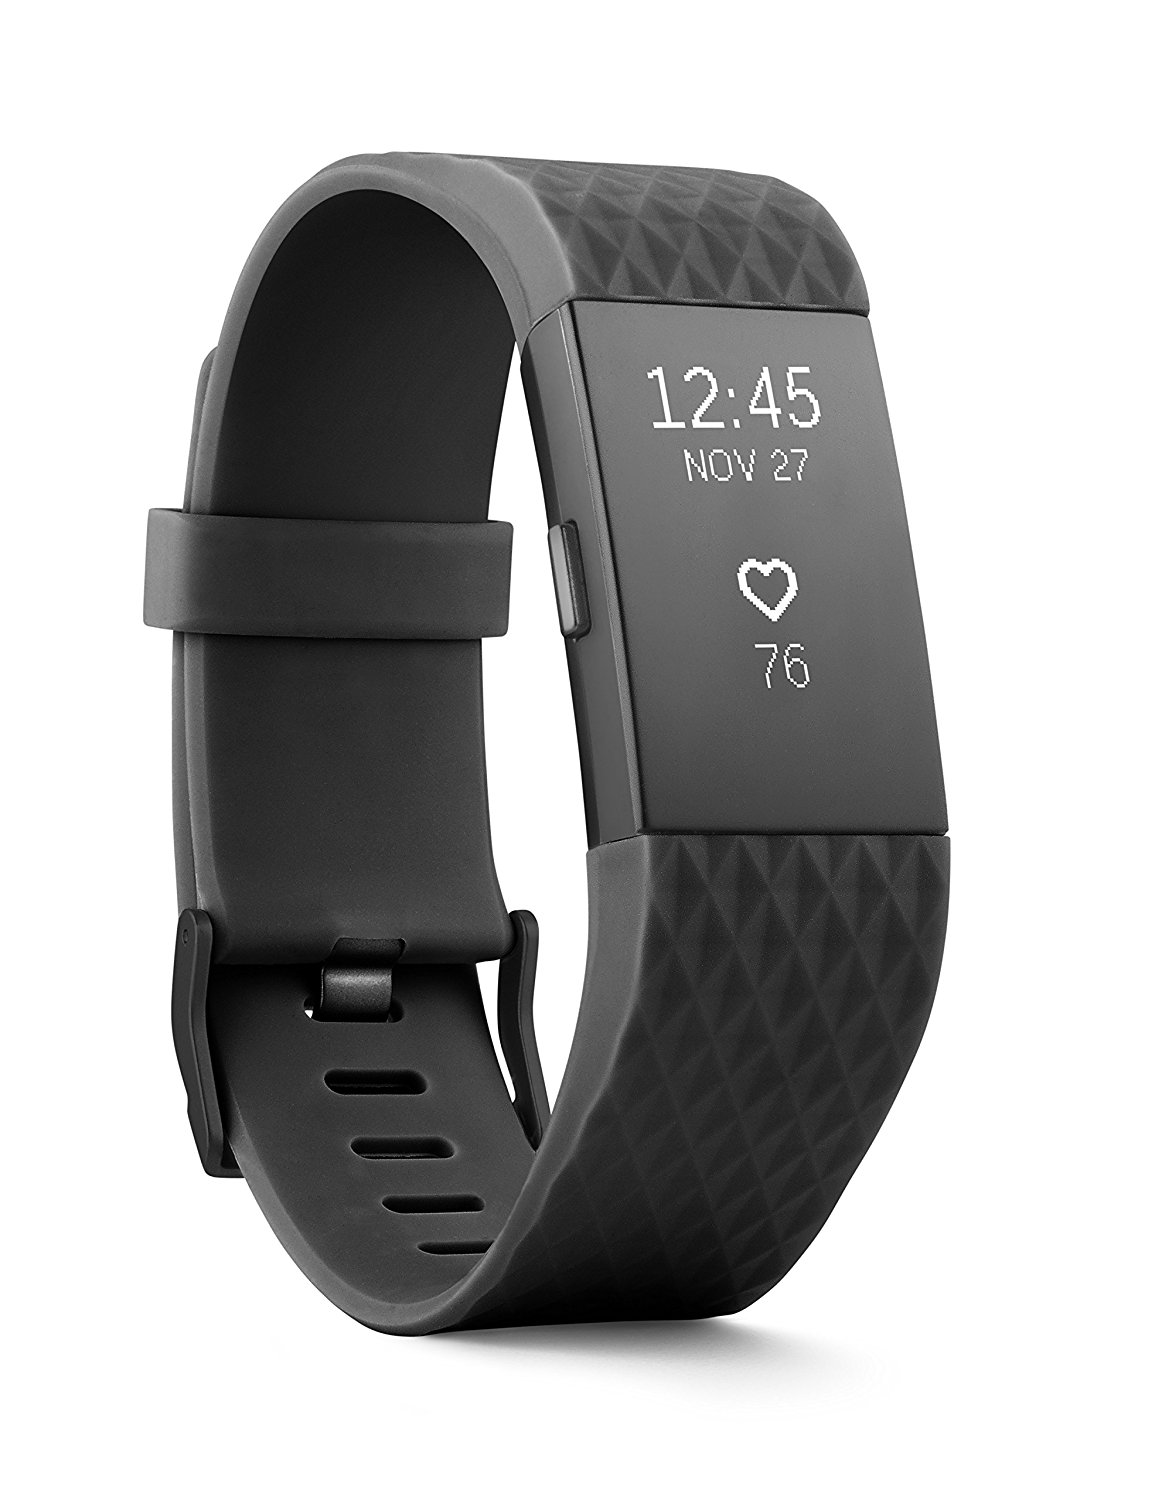 Fitbit Charge 2 - SmartWatches.org